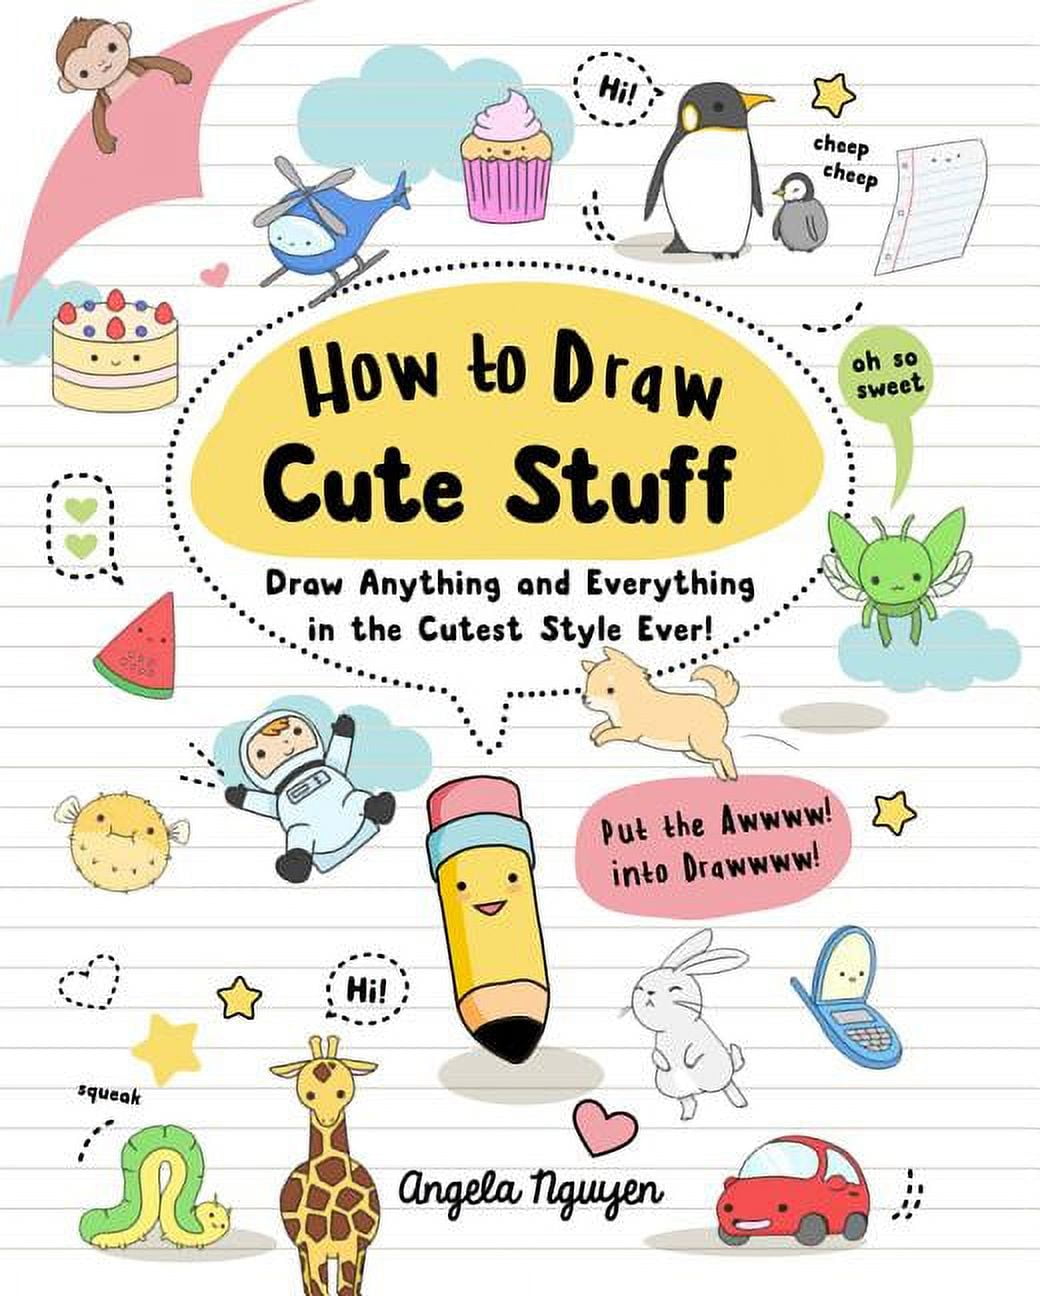 How to Draw Cute Stuff for Kids: A step by step Drawing Guide for Kids to  Learn How to Draw 180 Cutie Stuff in 4 Easy Steps by Jay T.